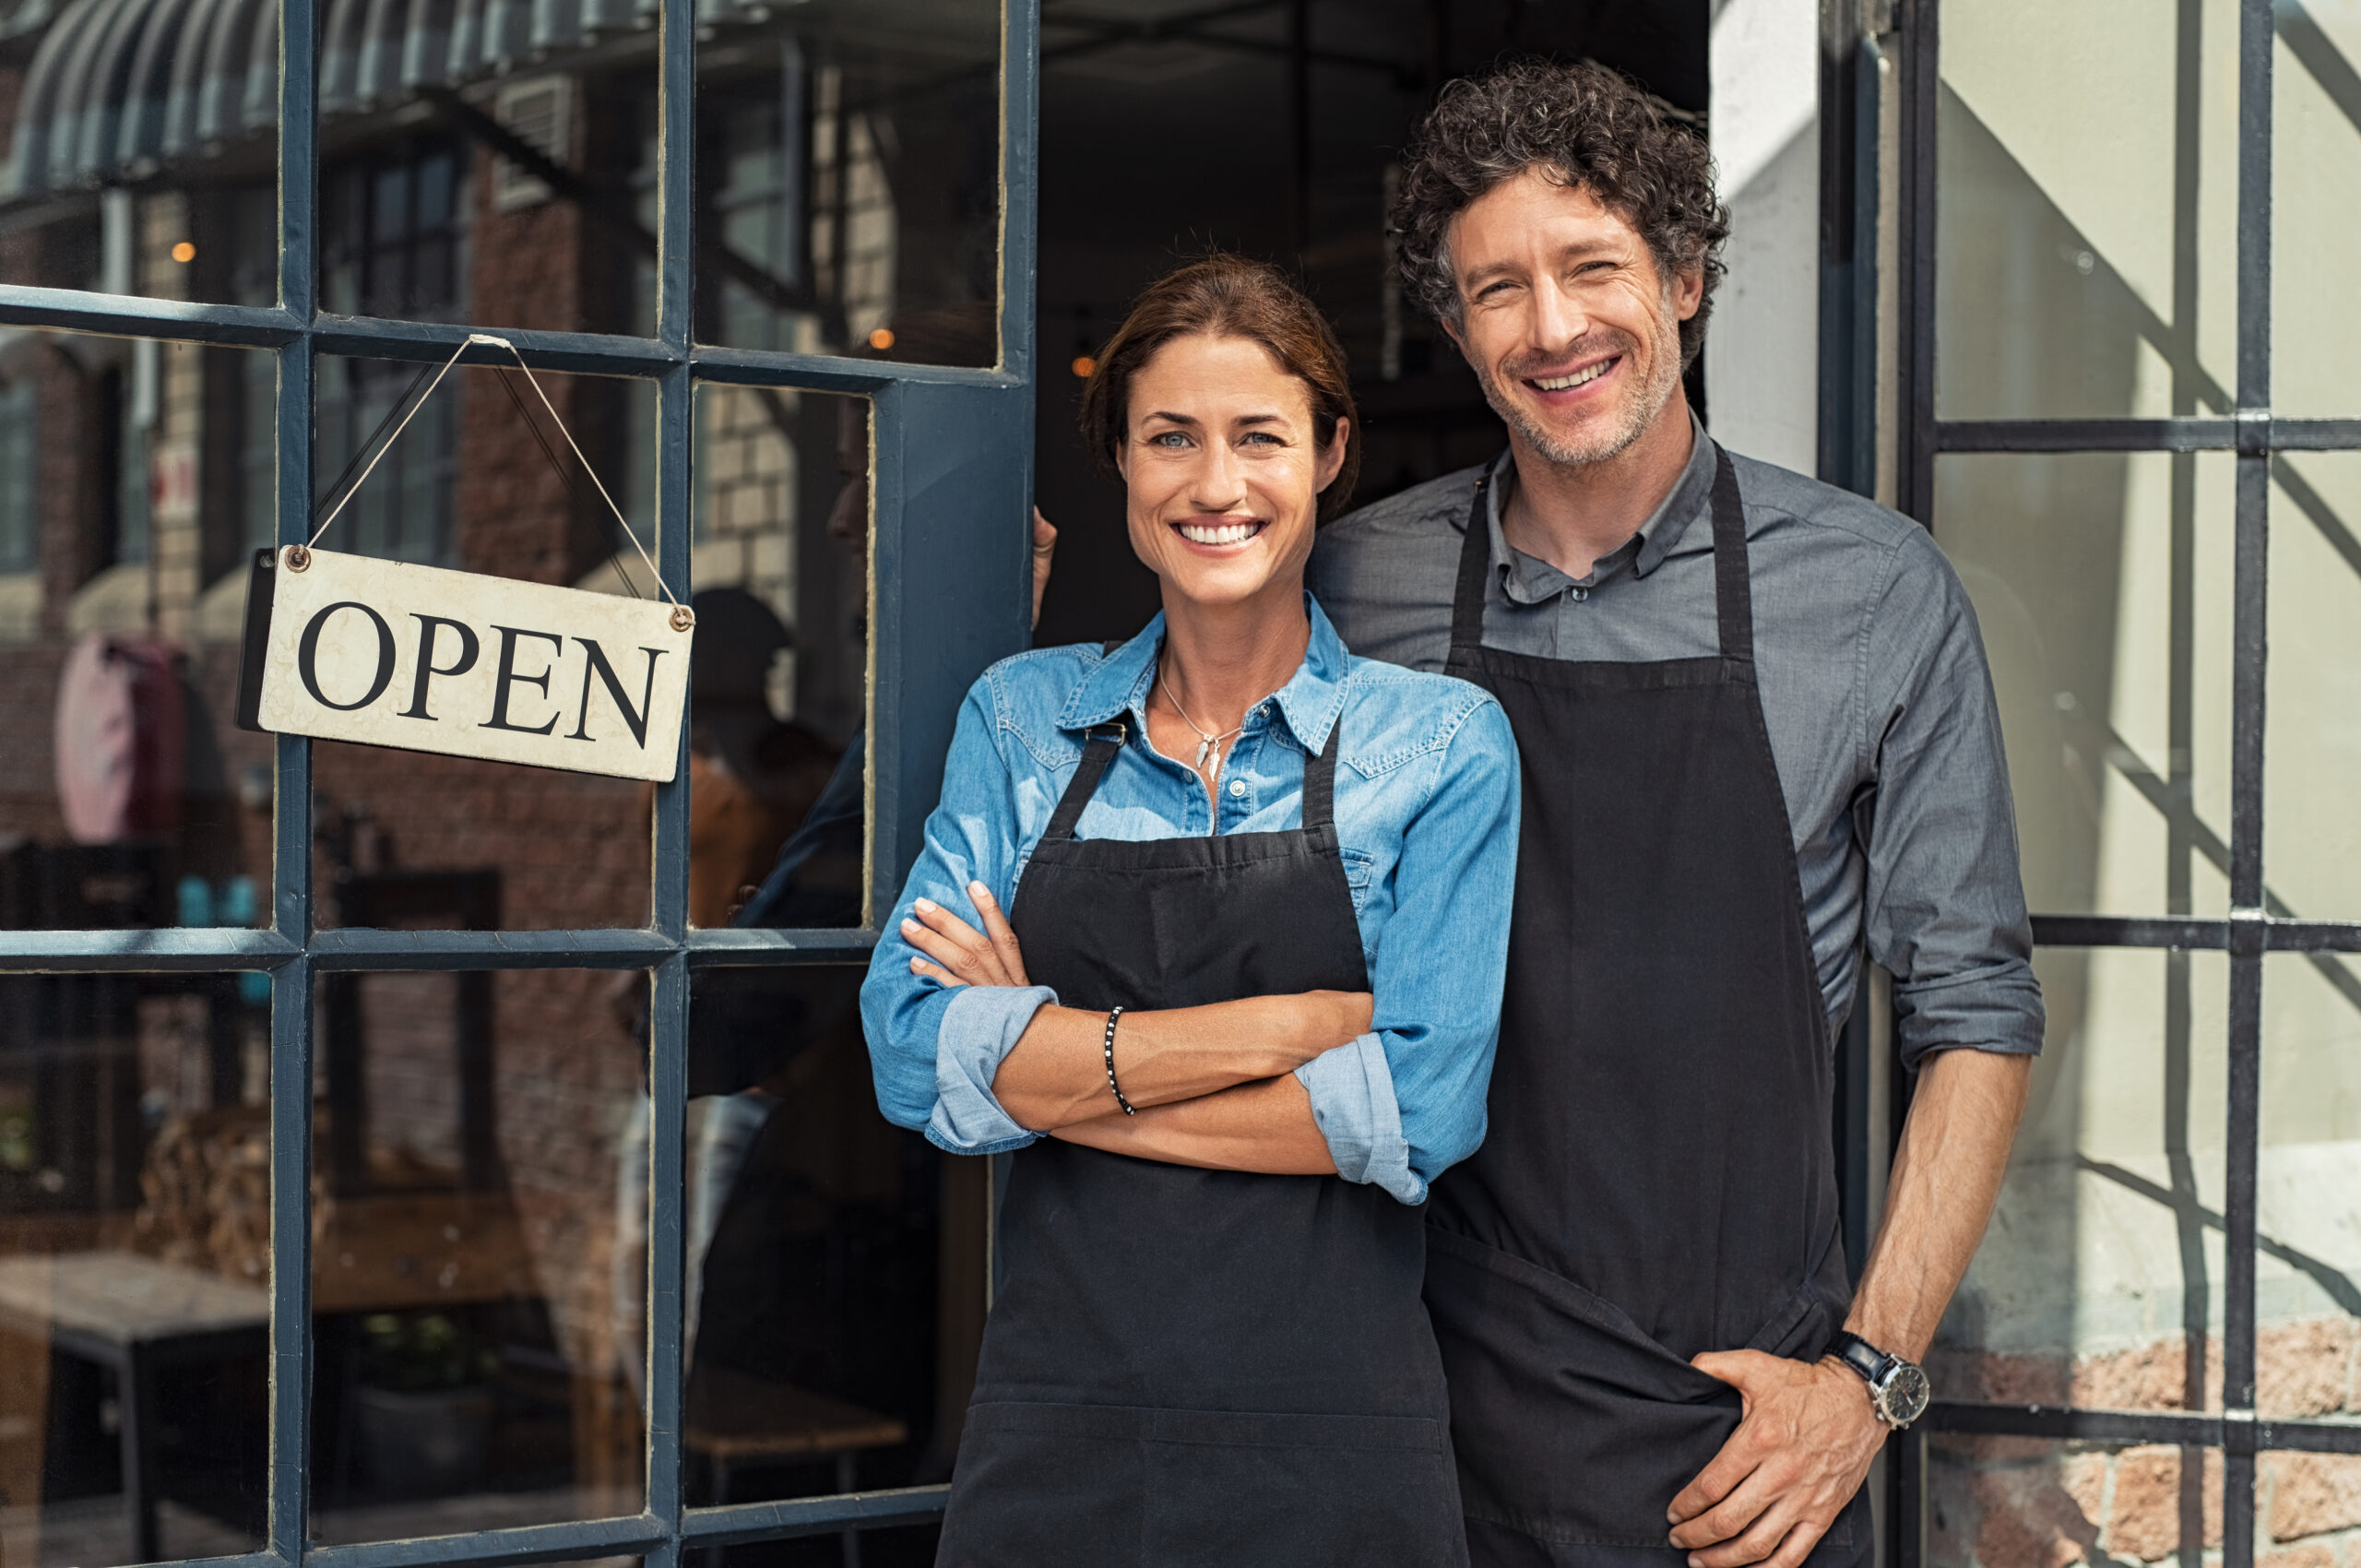 shop local two people standing in doorway by open sign